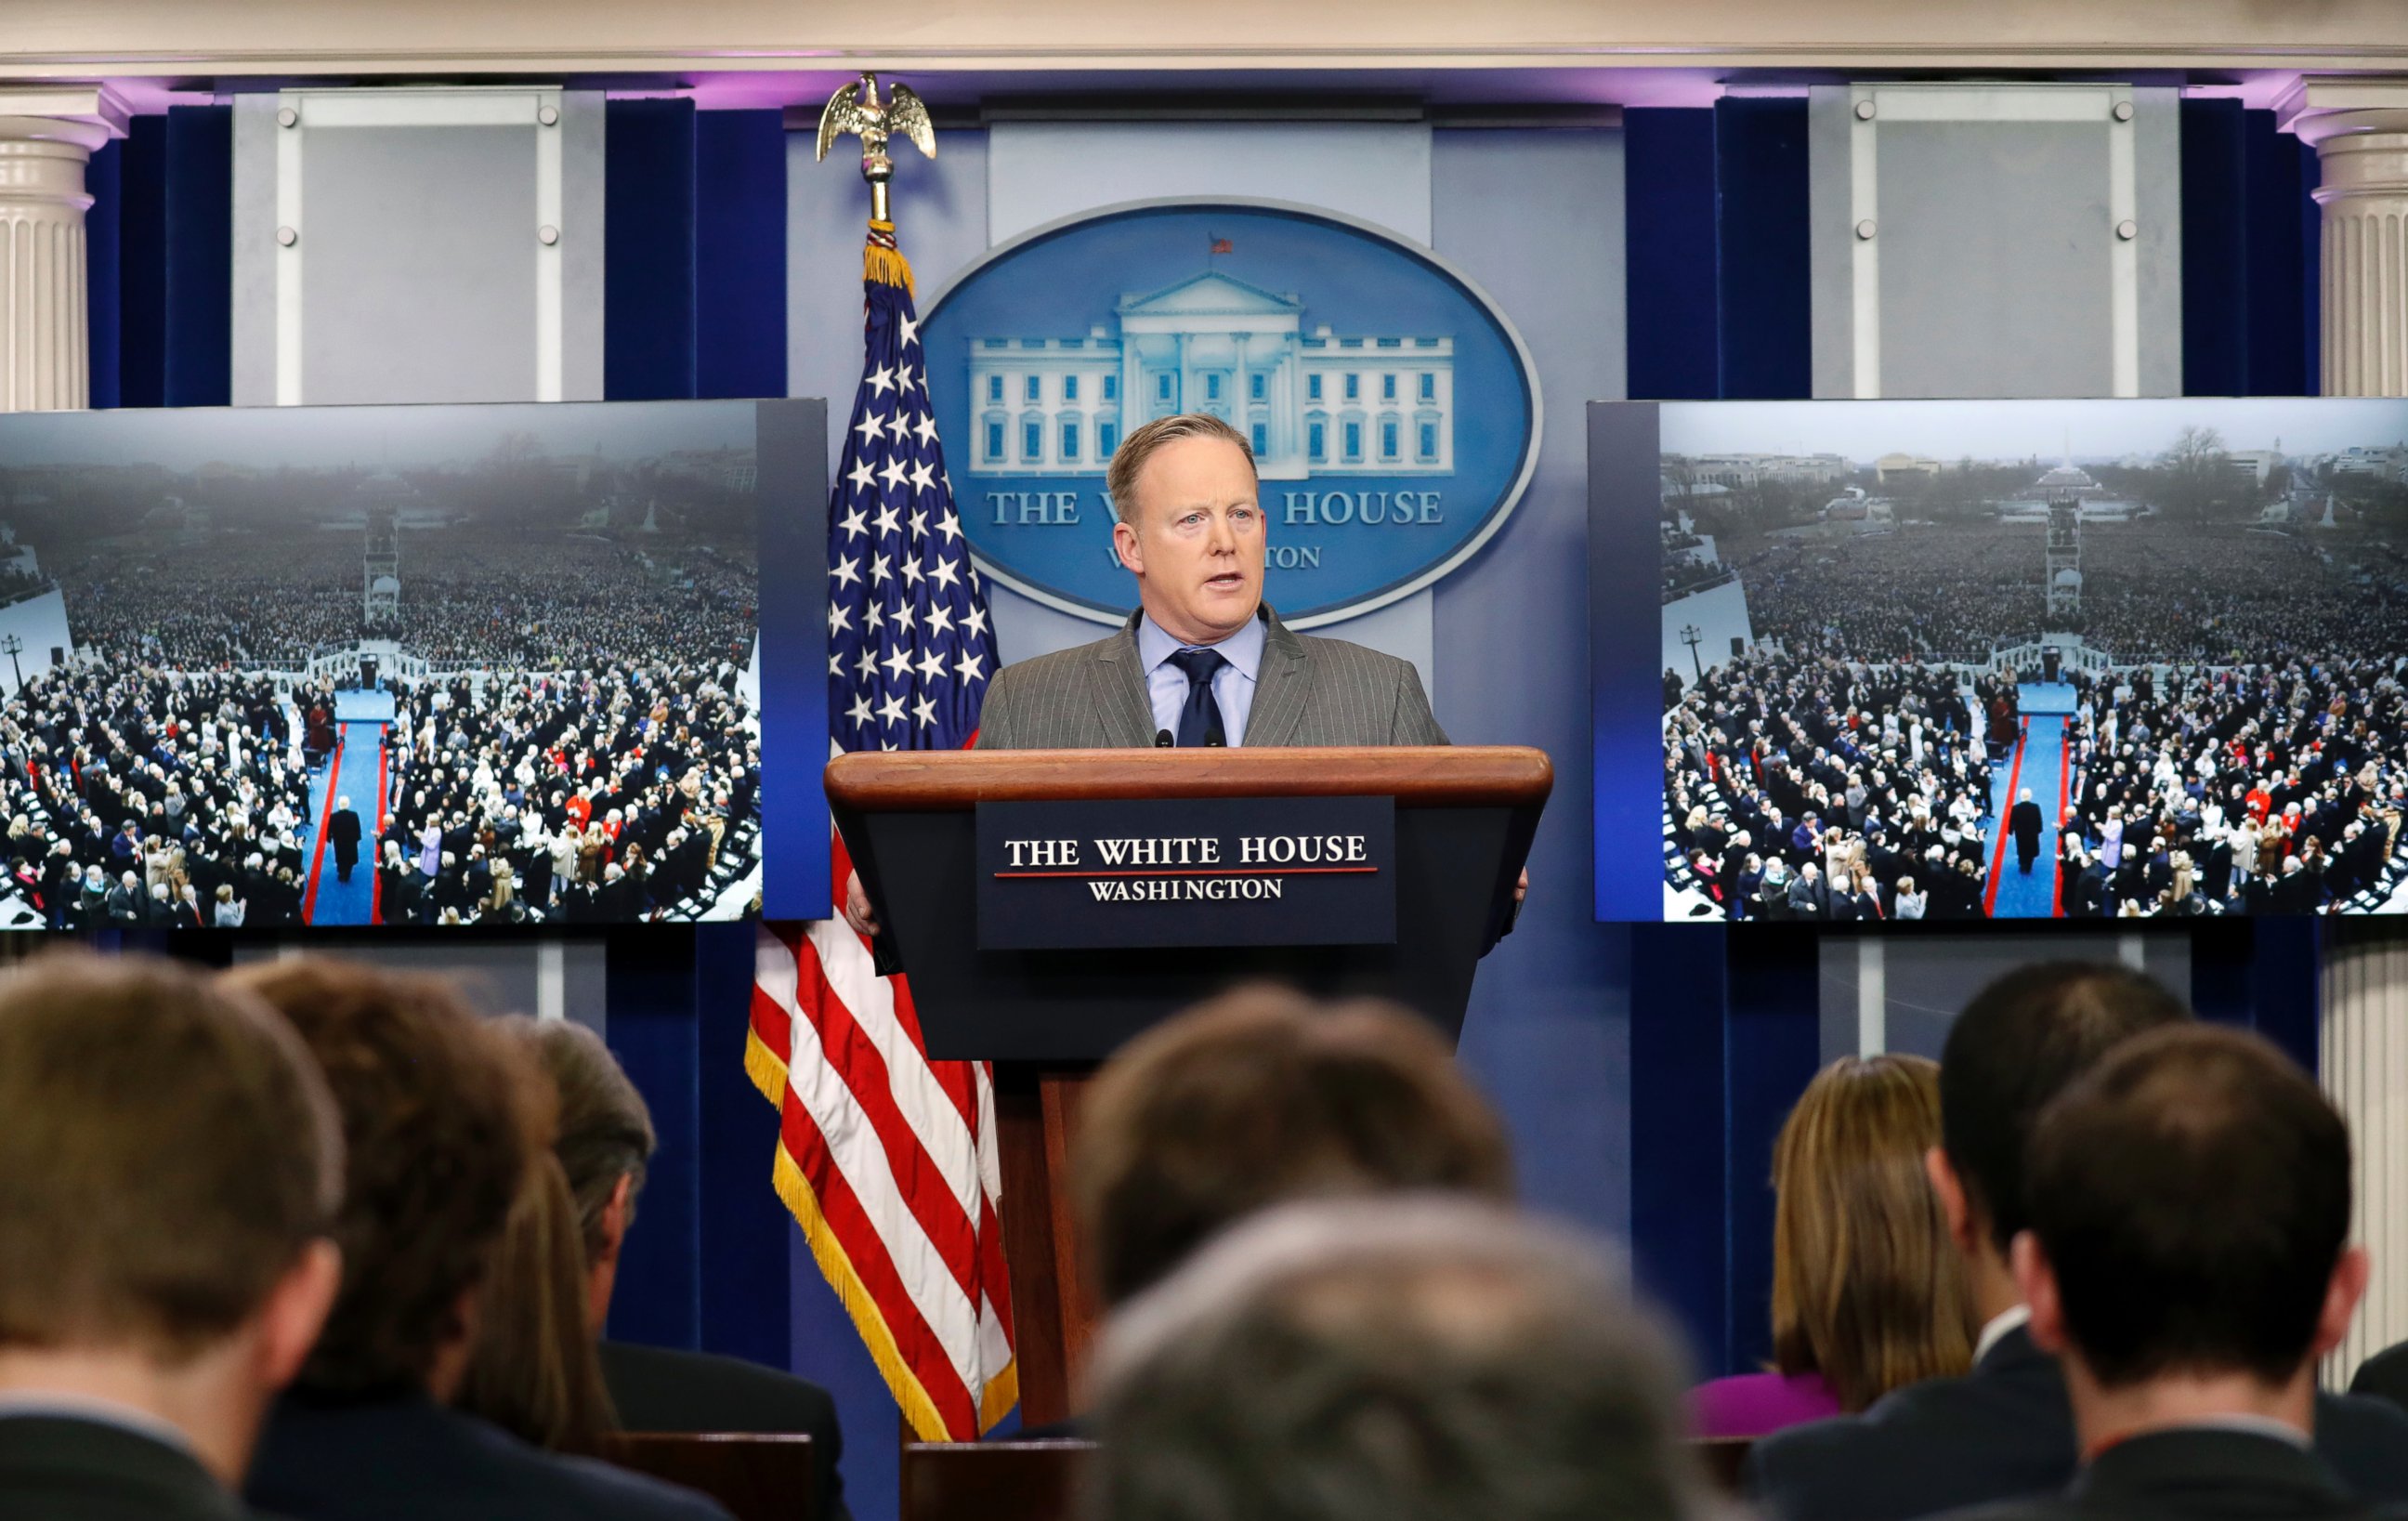 PHOTO: White House press secretary Sean Spicer speaks at the White House, Jan. 21, 2017 in Washington.  Spicer chastised journalists for their coverage of attendance at Donald Trump's inauguration.